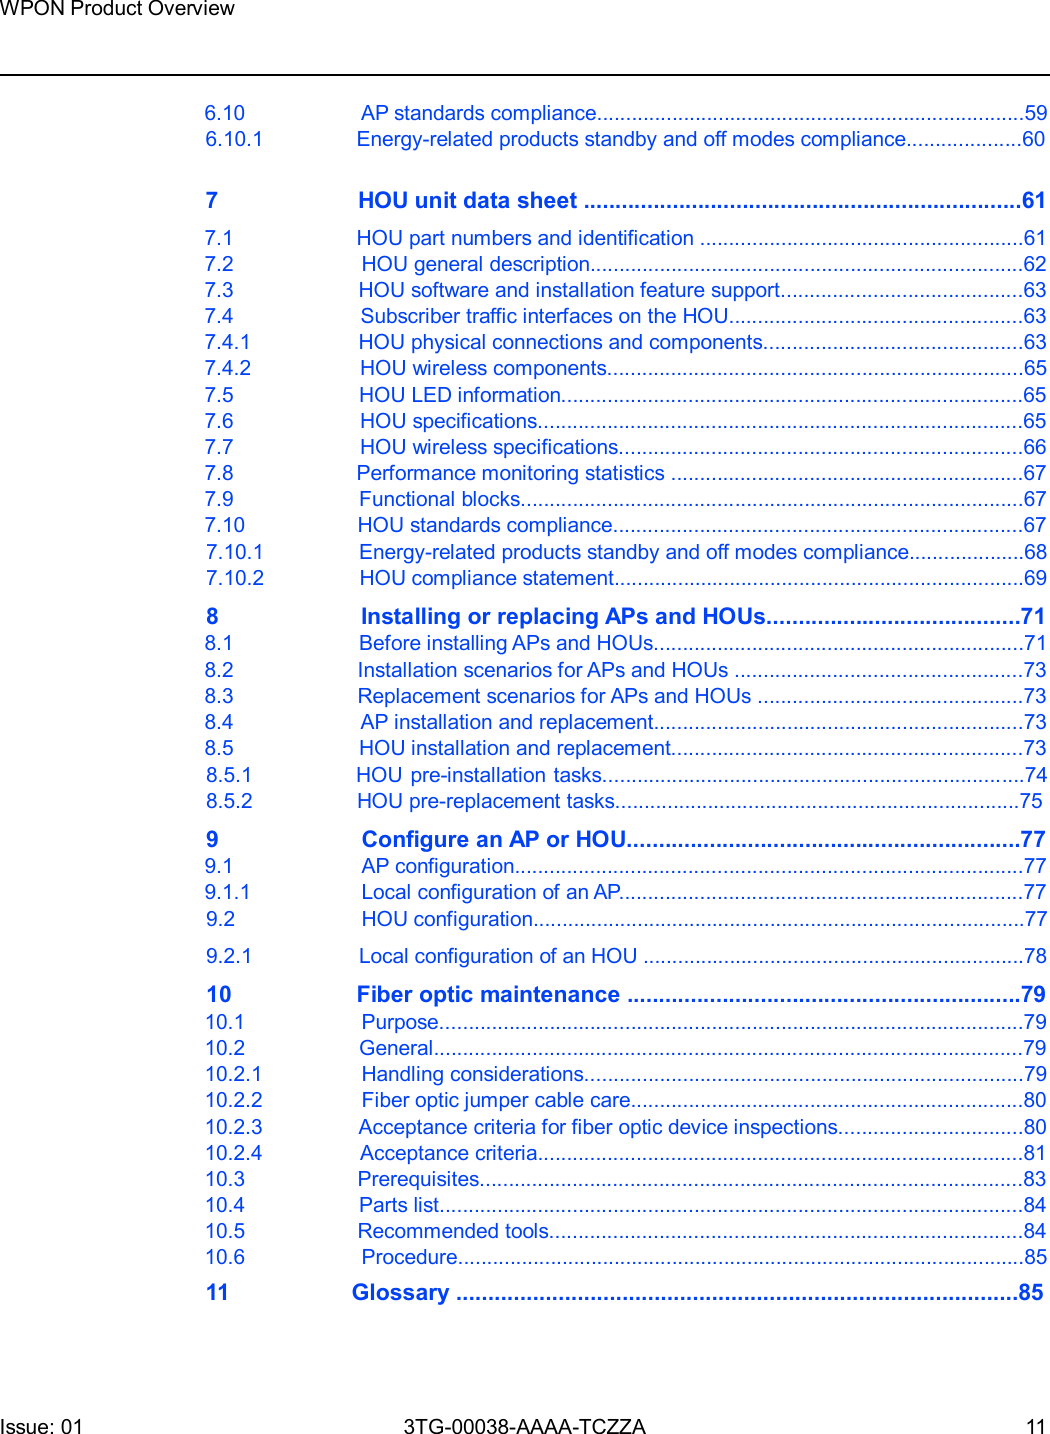 Page 11 of Nokia Bell 7577WPONAPAC WPON User Manual WPON Product Overview